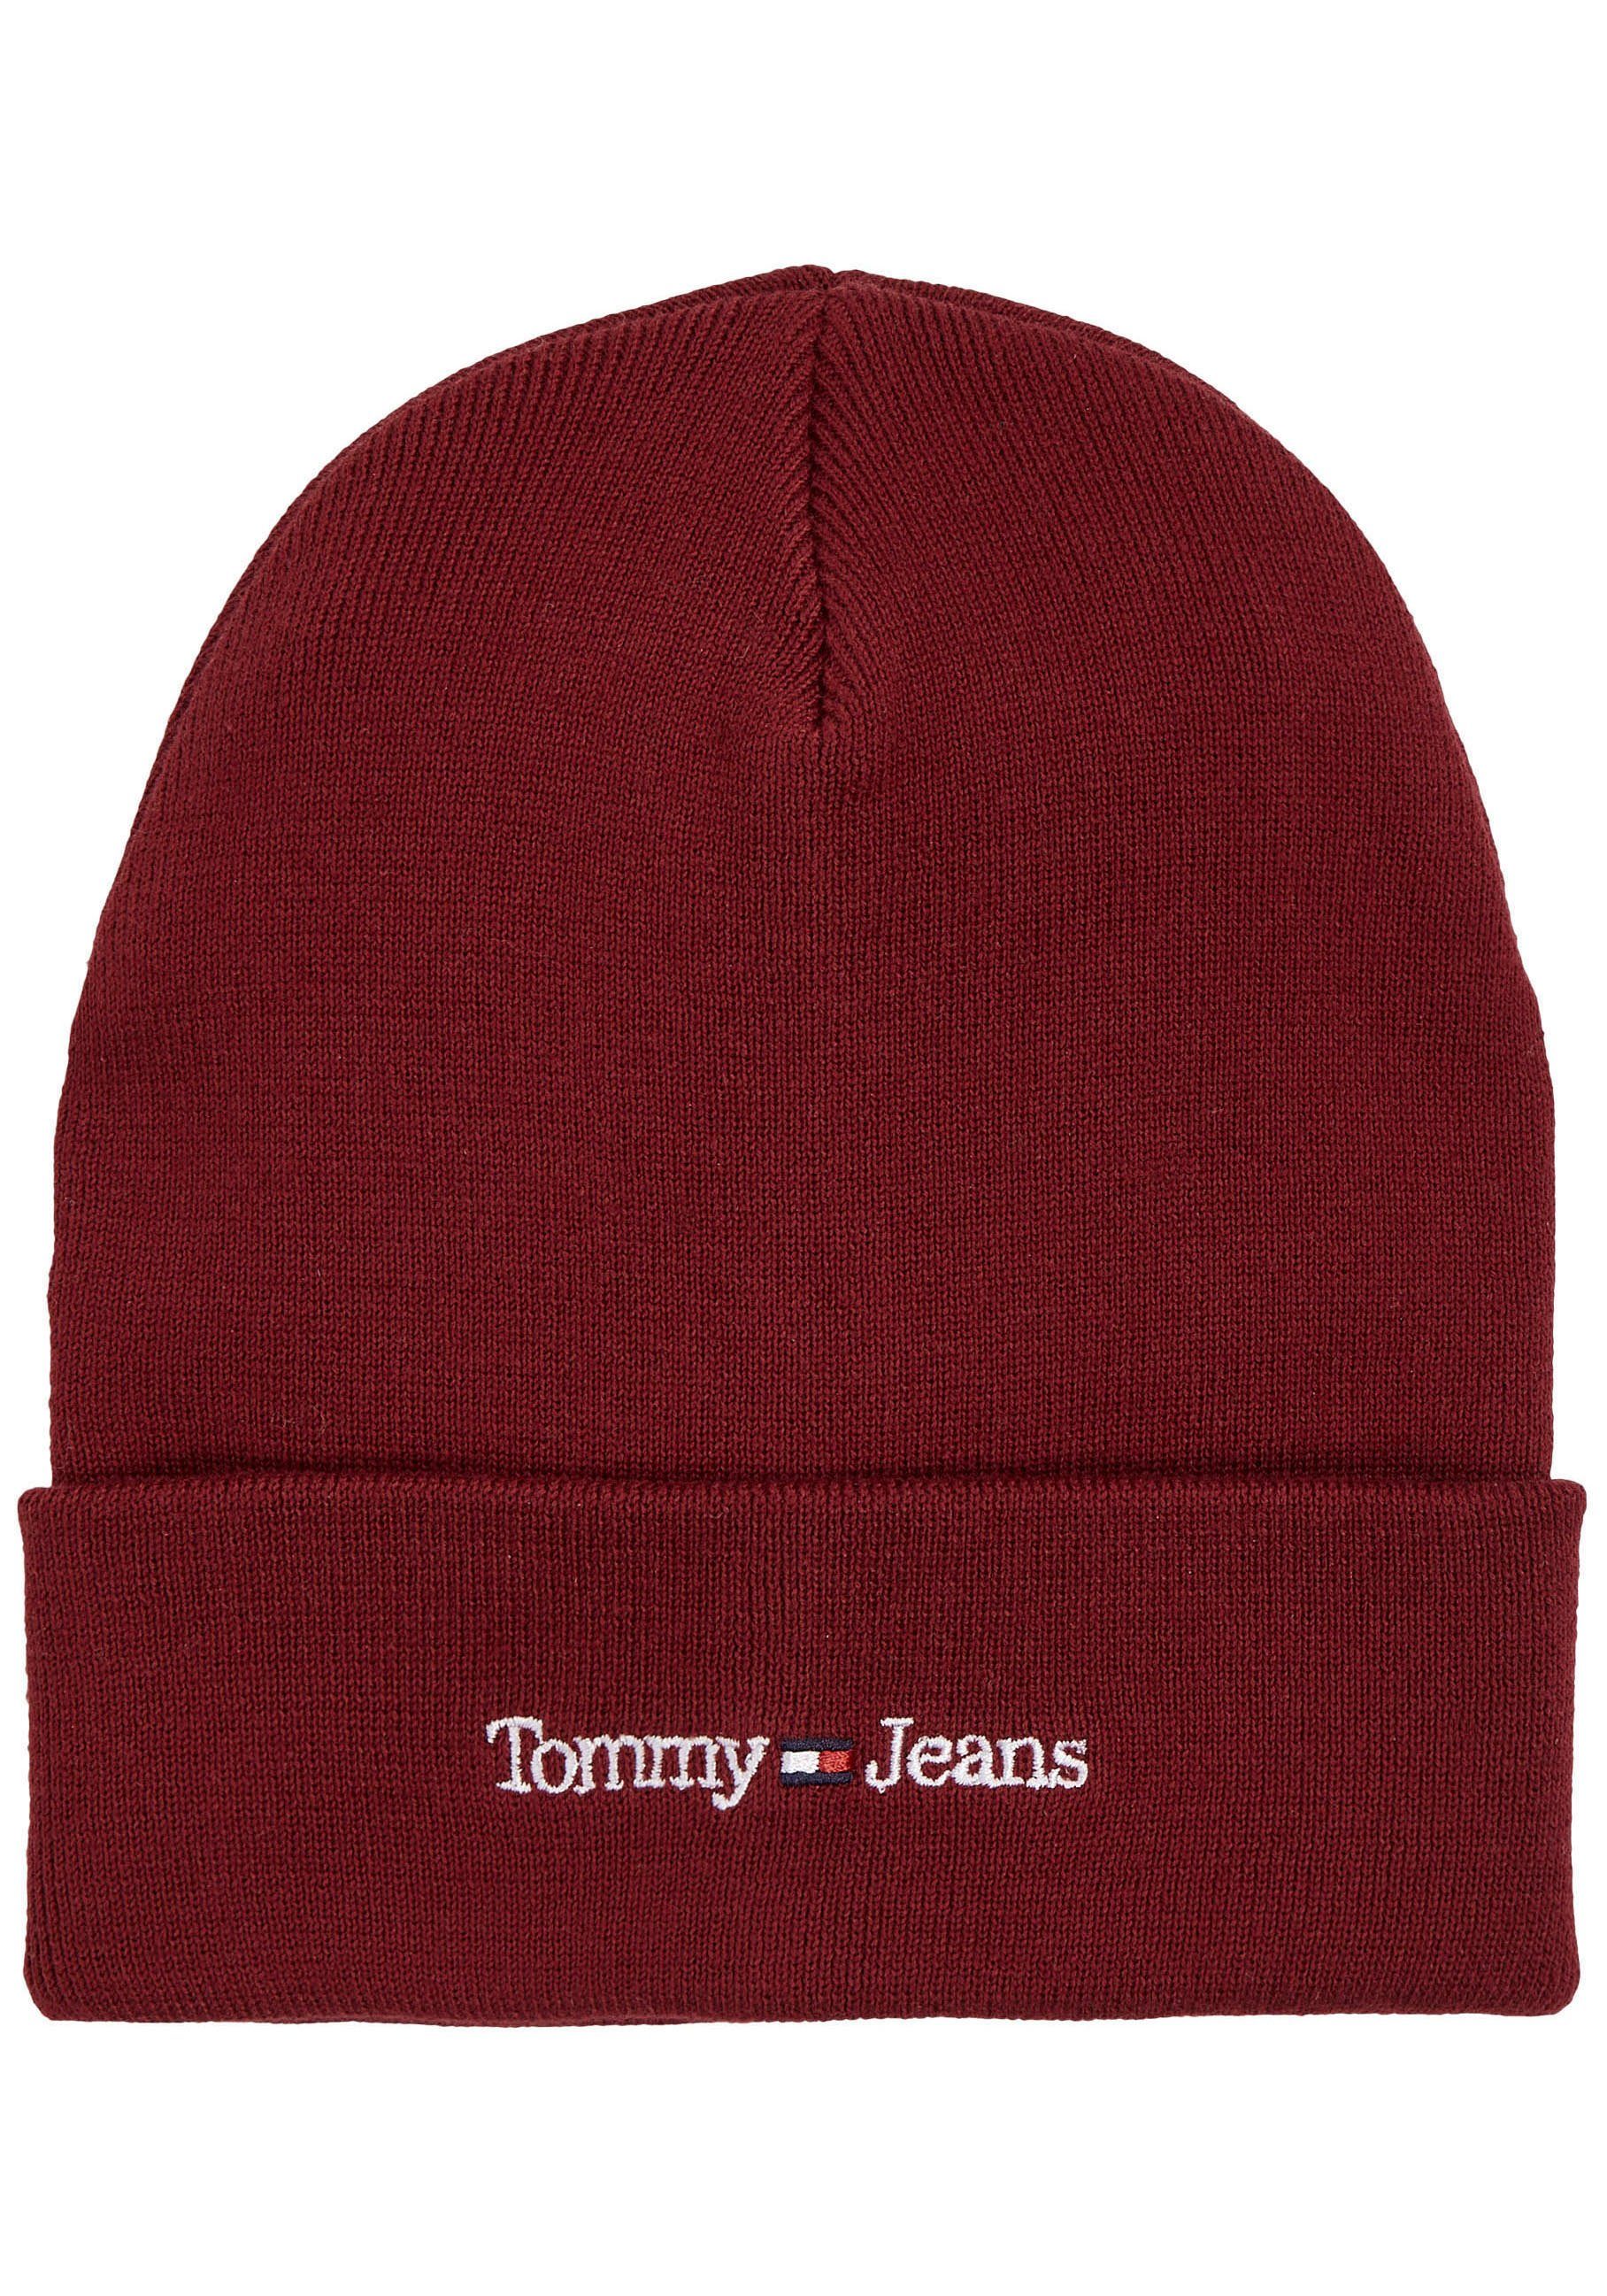 TJM BEANIE Beanie Tommy Jeans Rouge SPORT